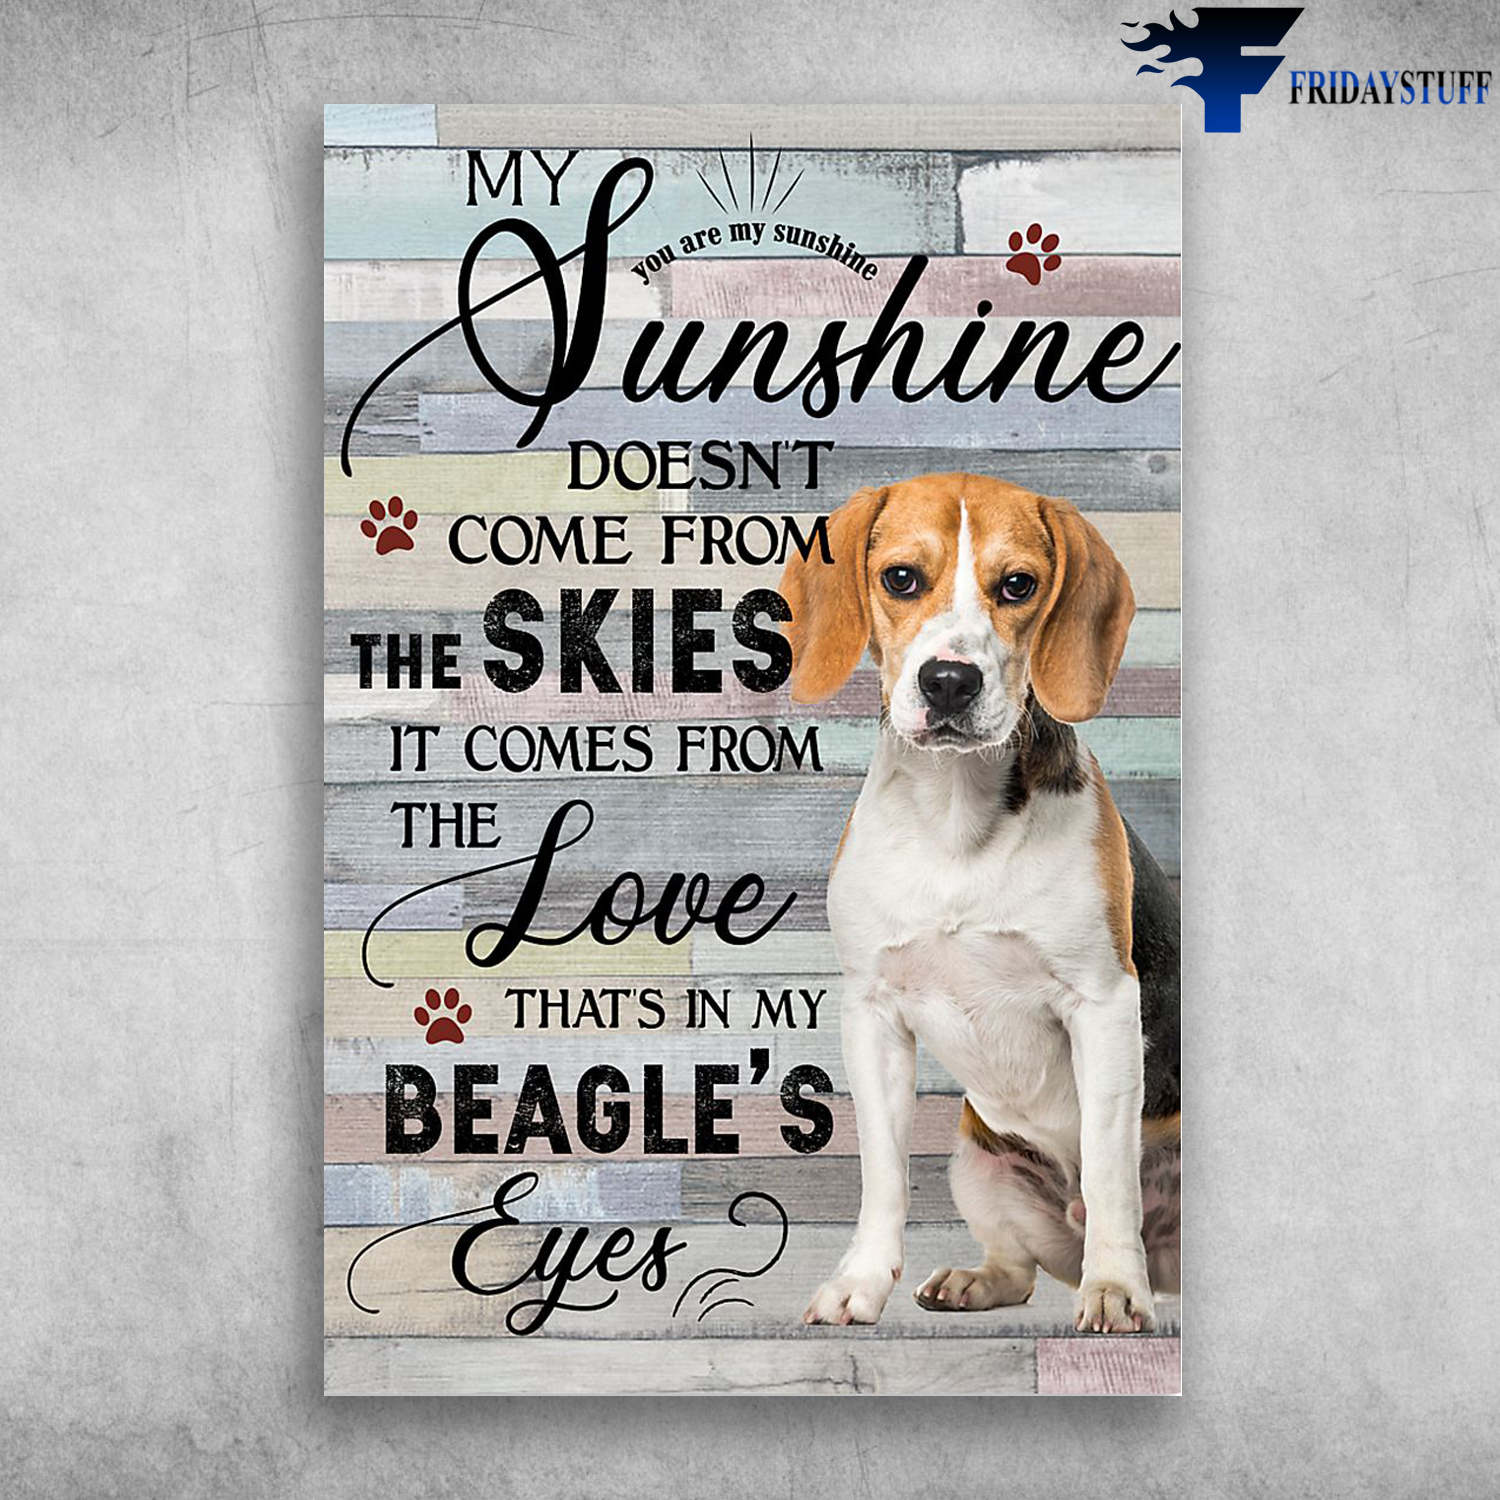 Beagle Dog - My Sunshine Doesn't Come From The Skies It Comes From Te Love, That' In My Beagle's Eyes